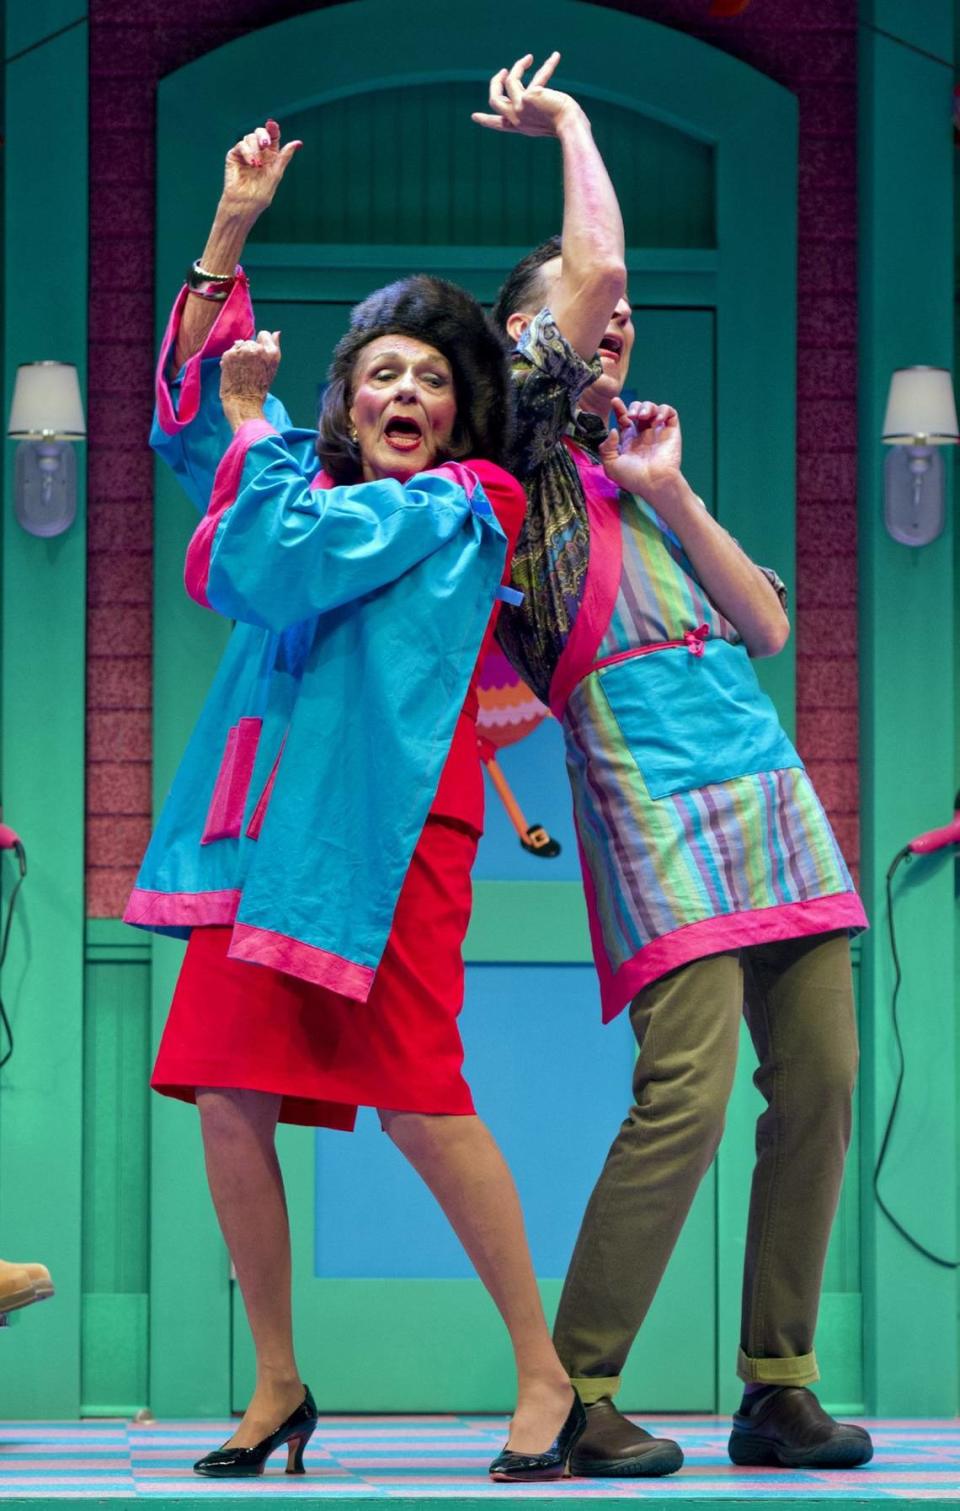 Dodie Brown and Kansas City actor Ron Megee danced together in the New Theatre’s 2014 production of “Shear Madness,” starring Richard Karn.